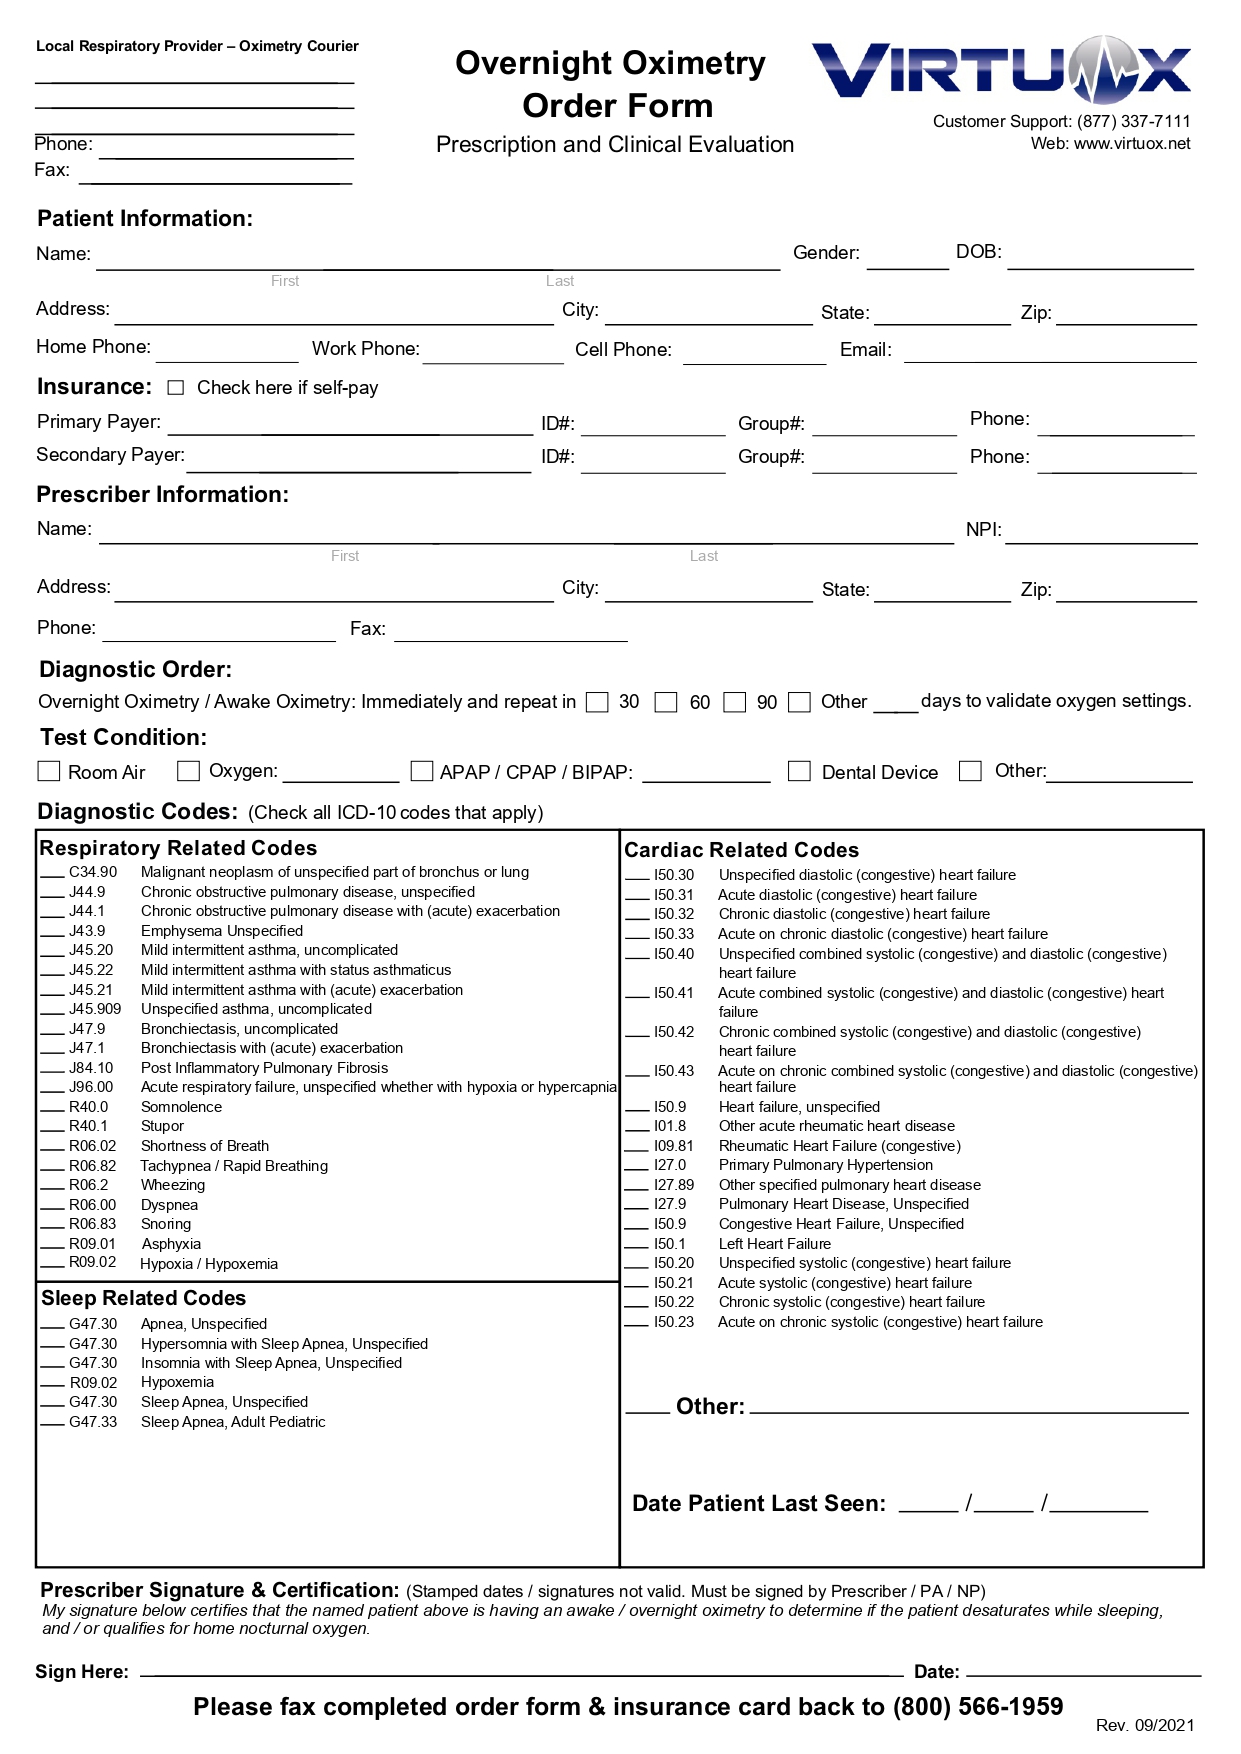 Overnight Oximetry Order Form